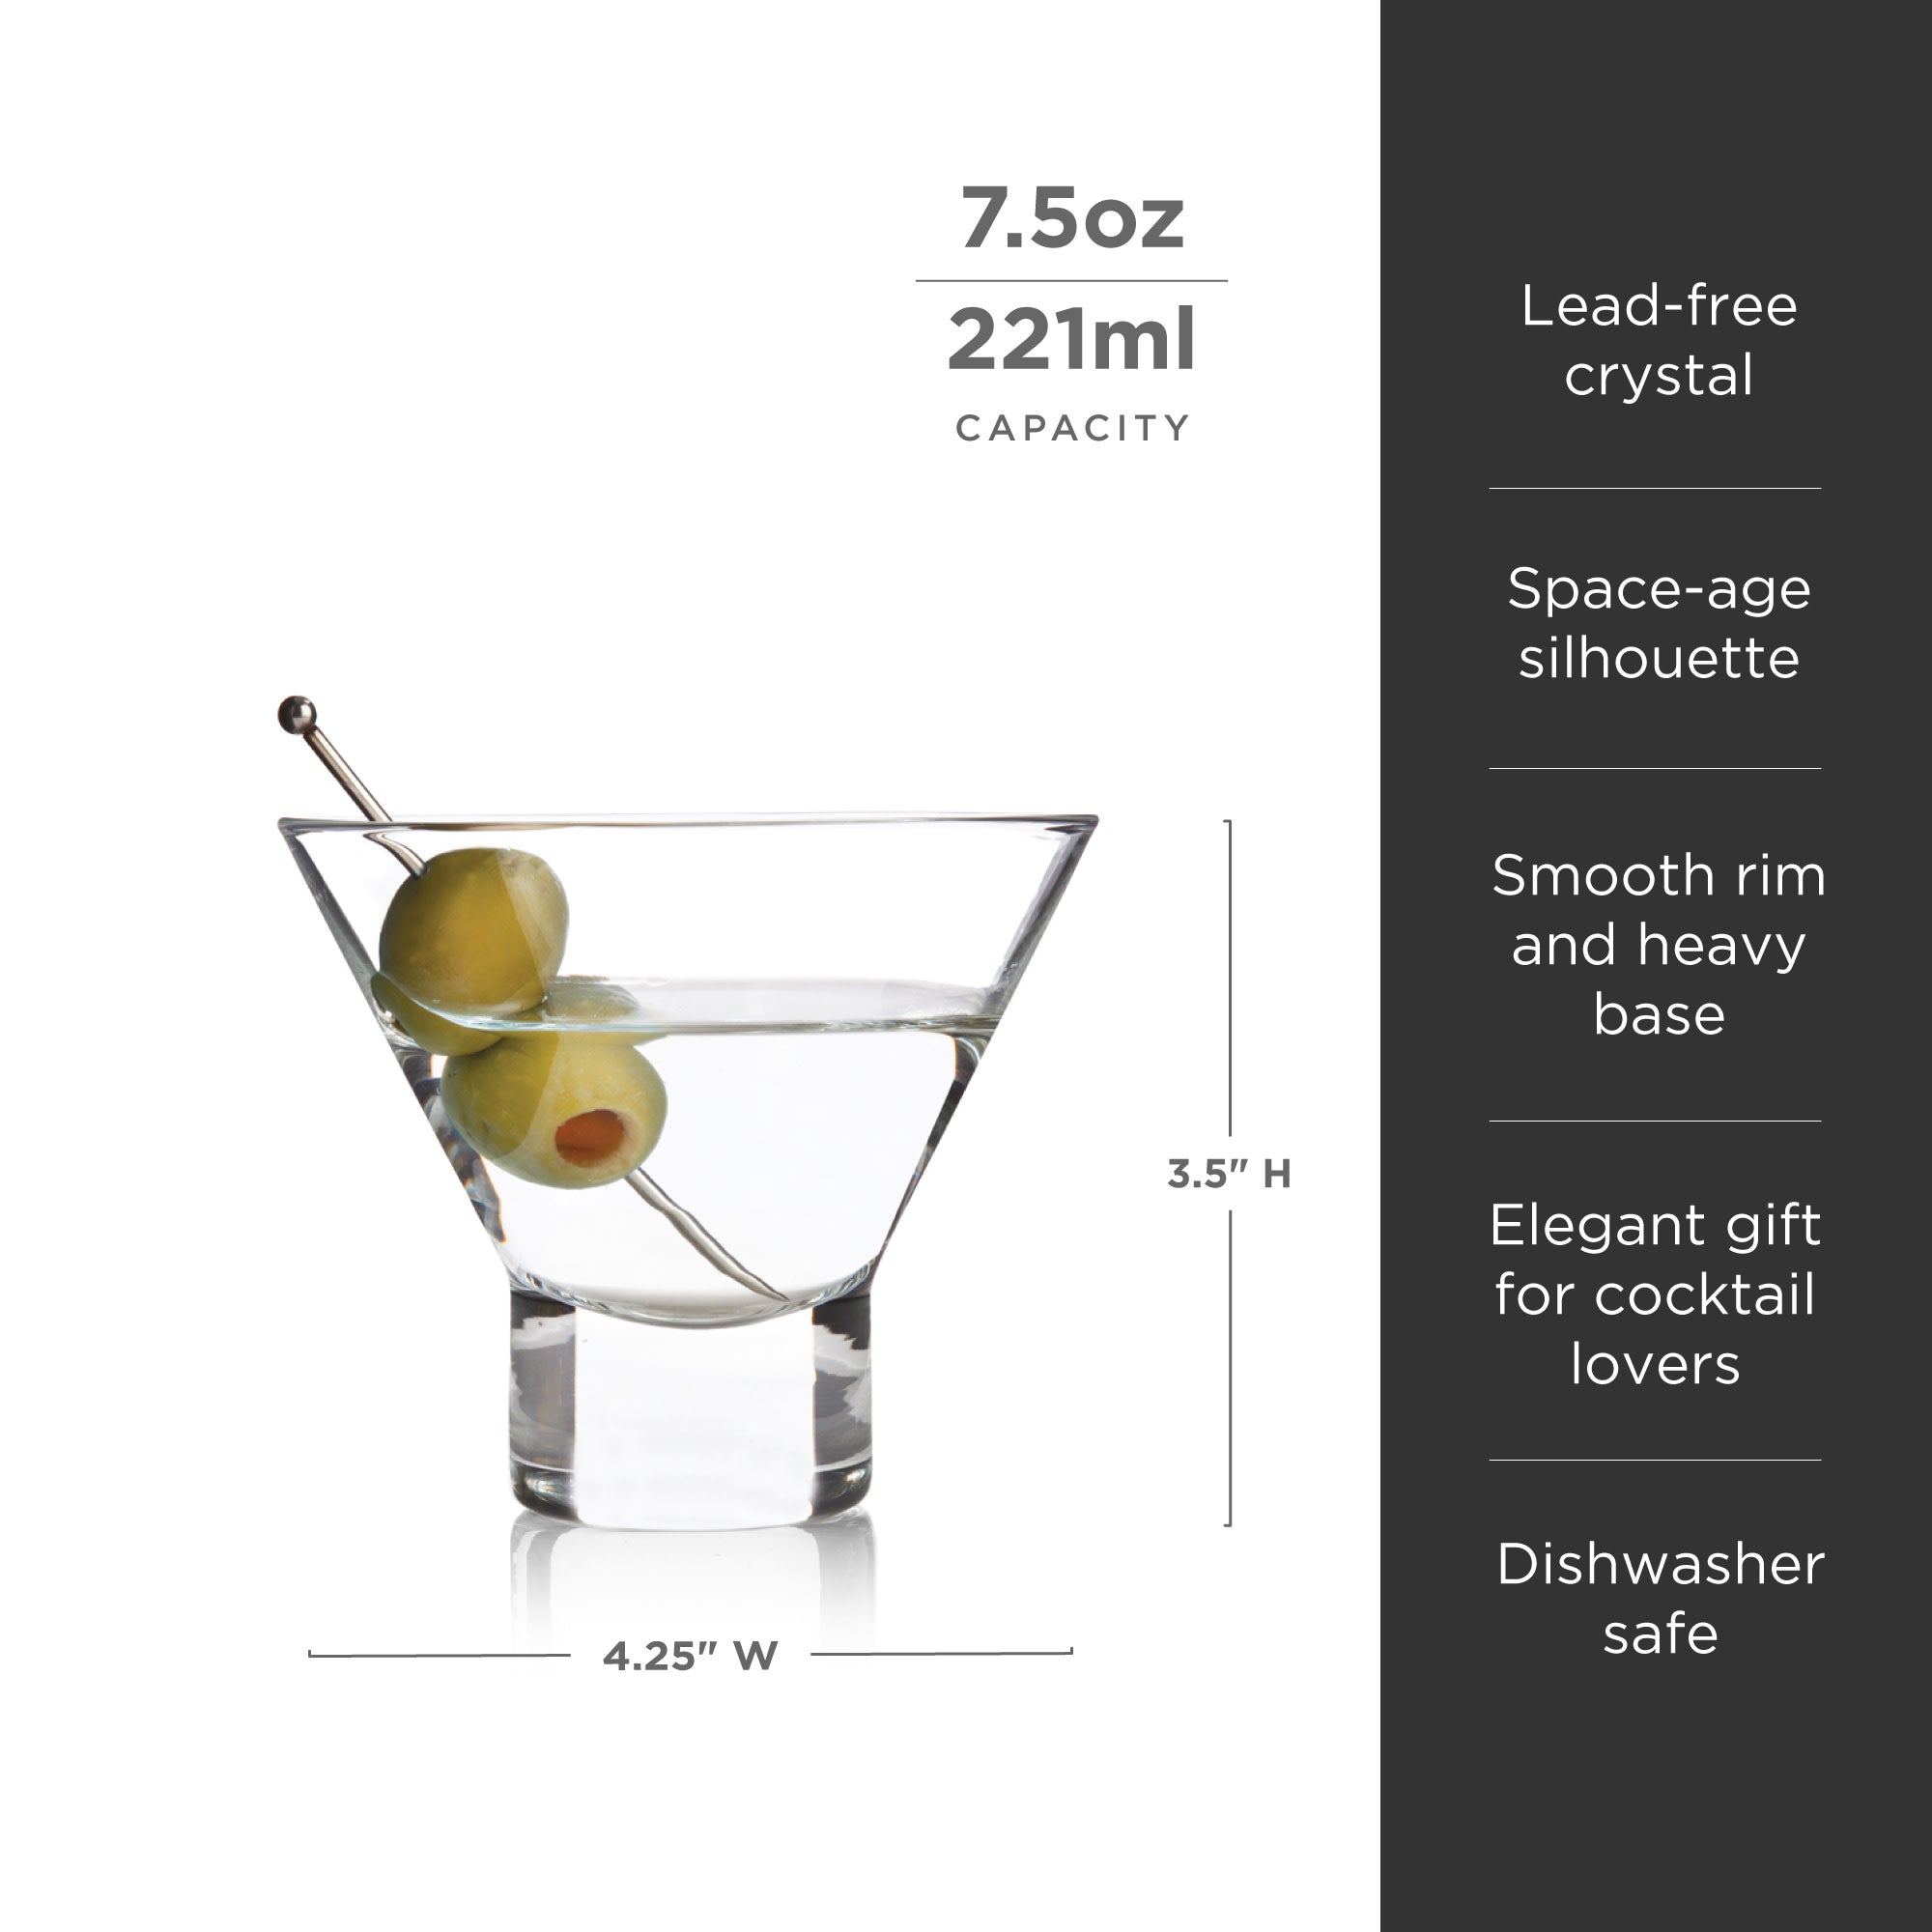 Martini Cocktail Glasses, Modern Glassware Collection, Set of 4